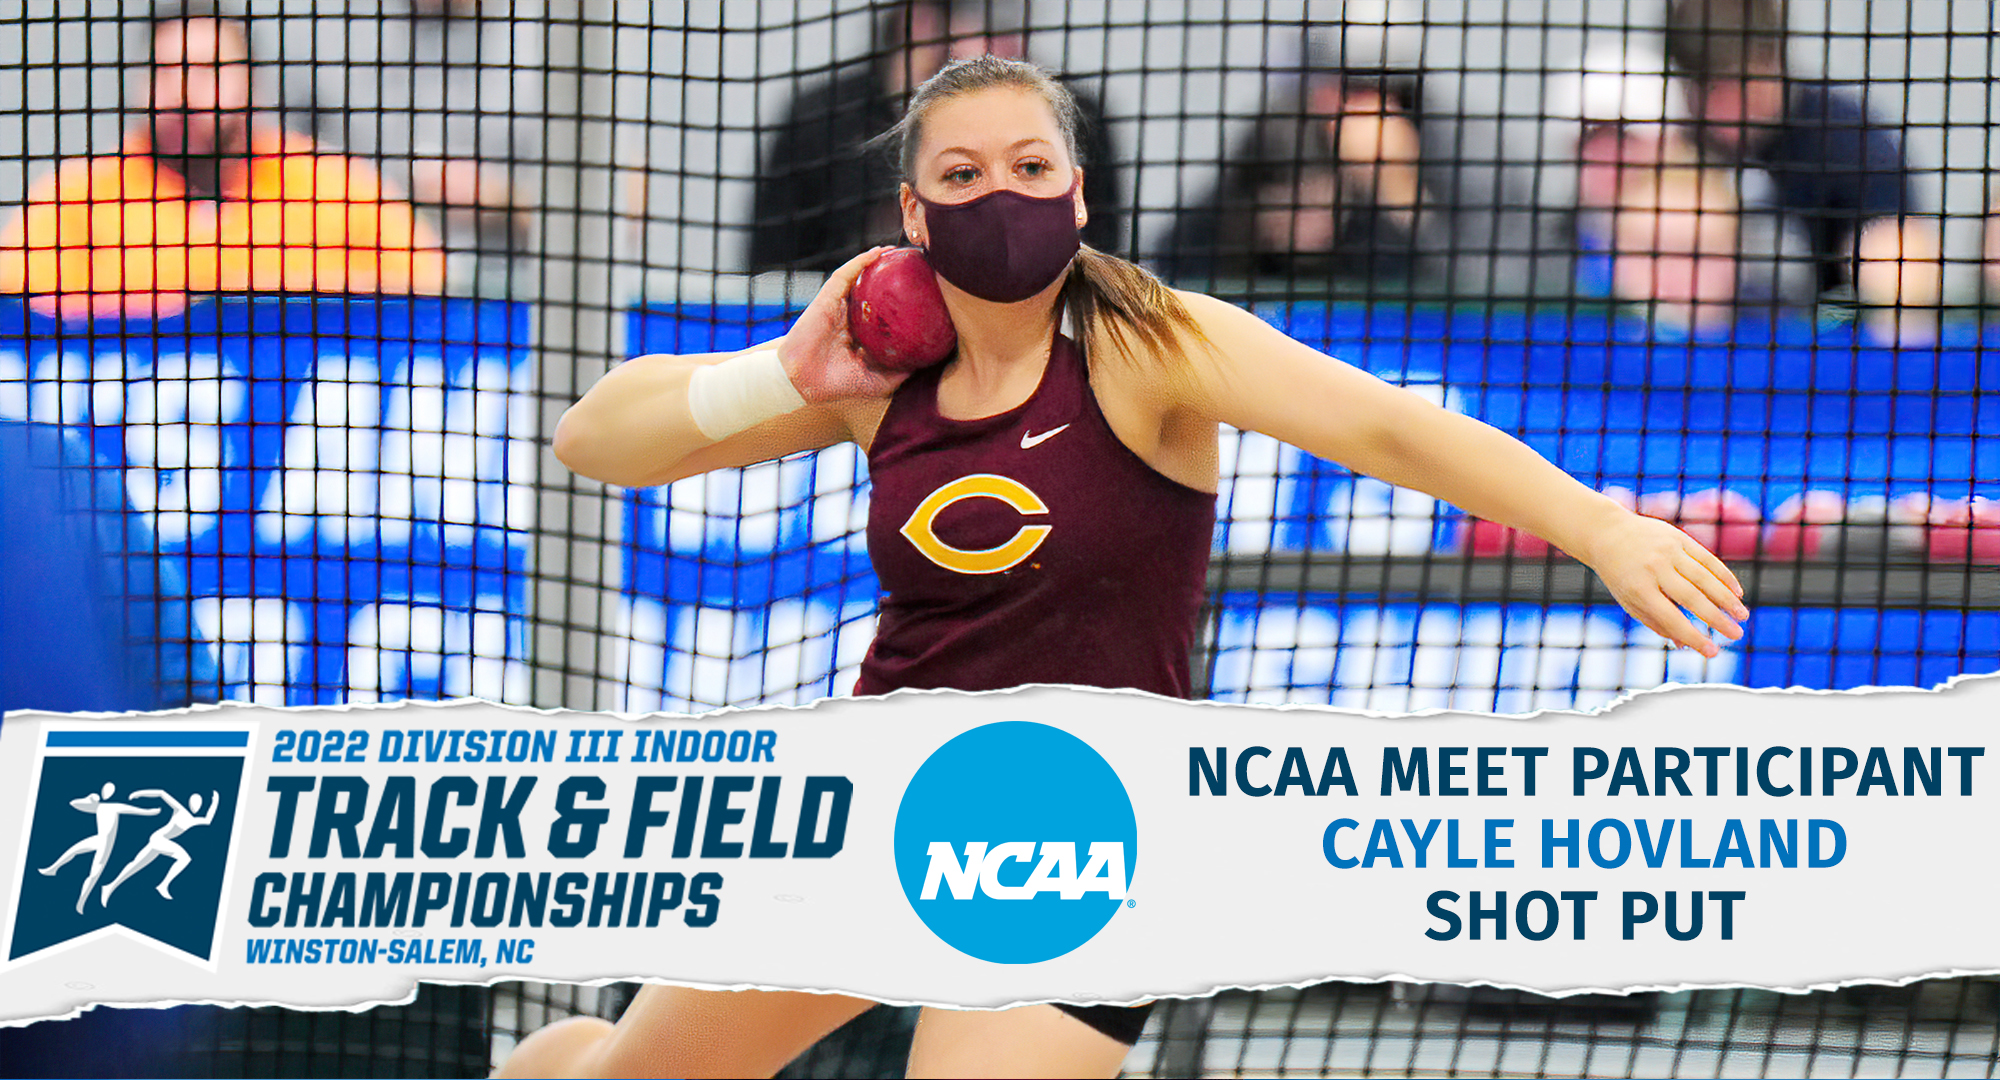 Cayle Hovland competed in her second straight national meet in the shot put. She recorded a distance of 39-11.25 and finished in 18th place.